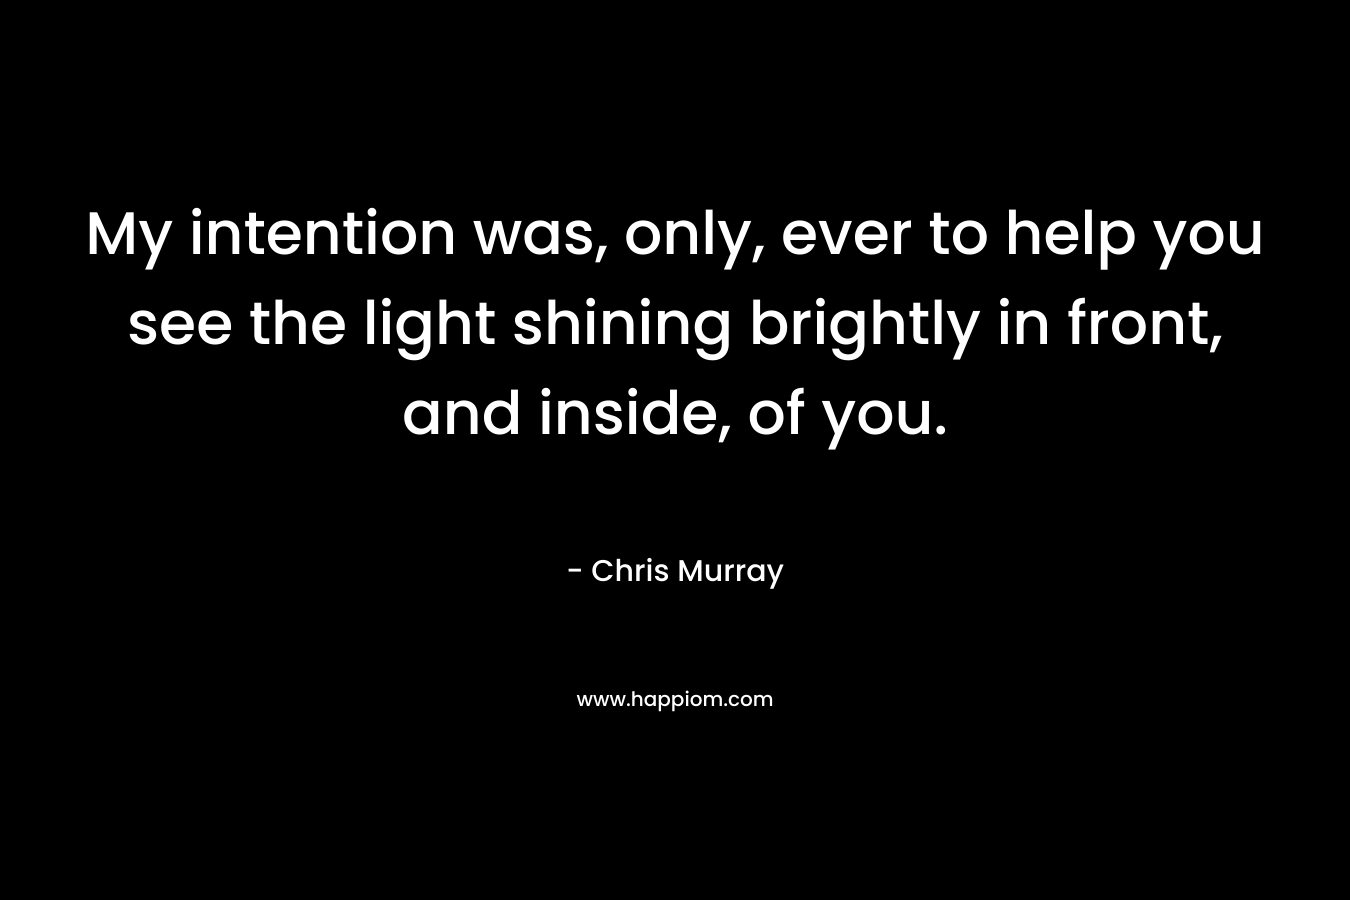 My intention was, only, ever to help you see the light shining brightly in front, and inside, of you.